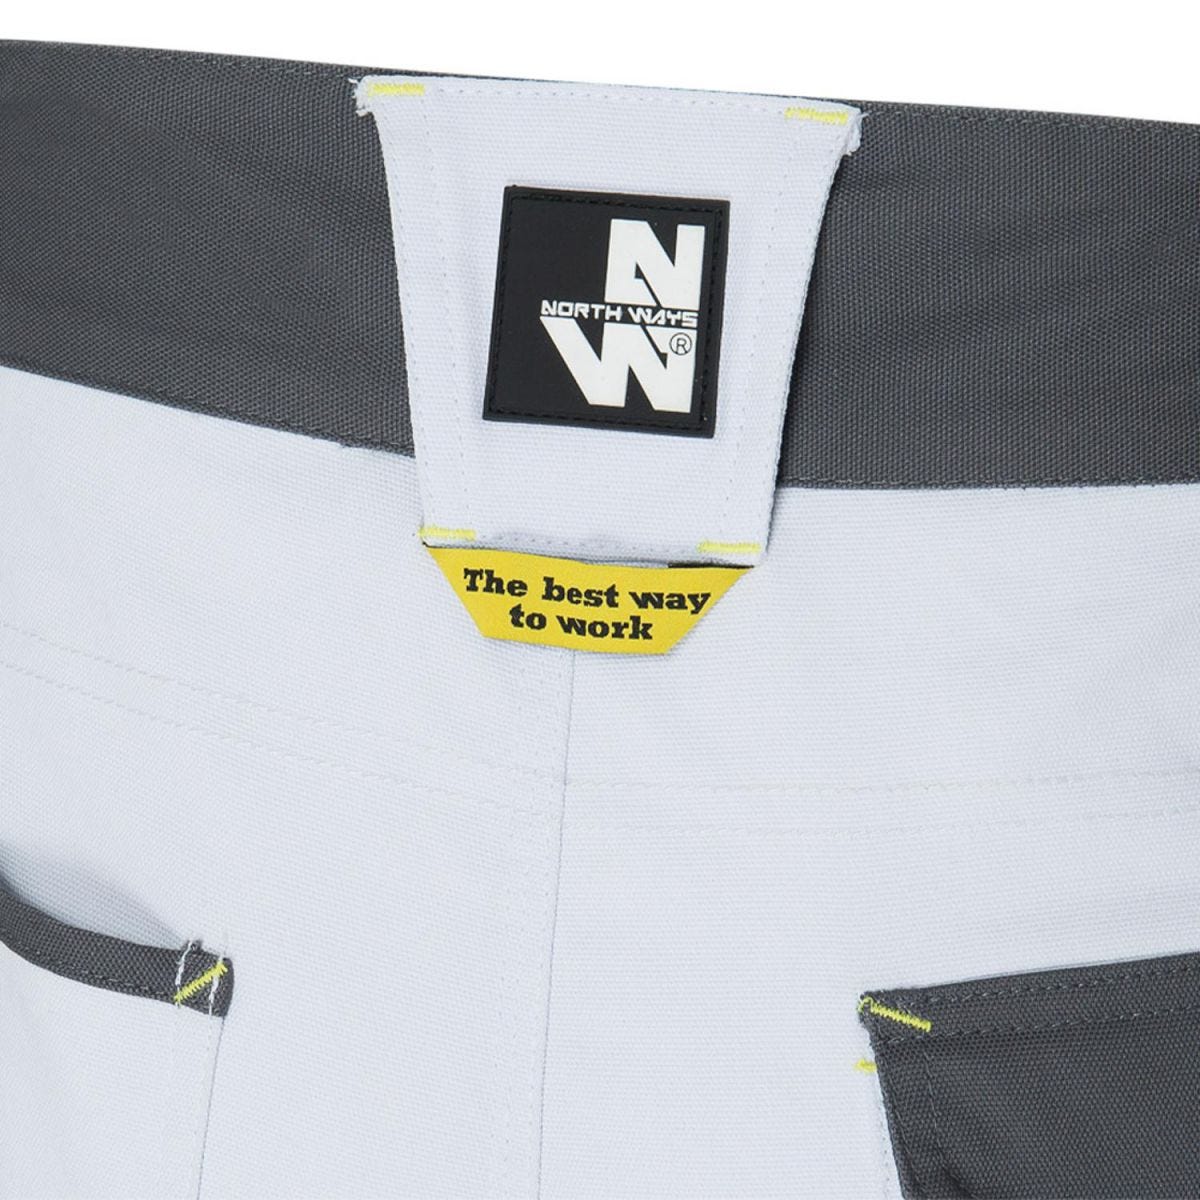 Pantalon de travail multipoches Cary blanc - North Ways - Taille 38 3